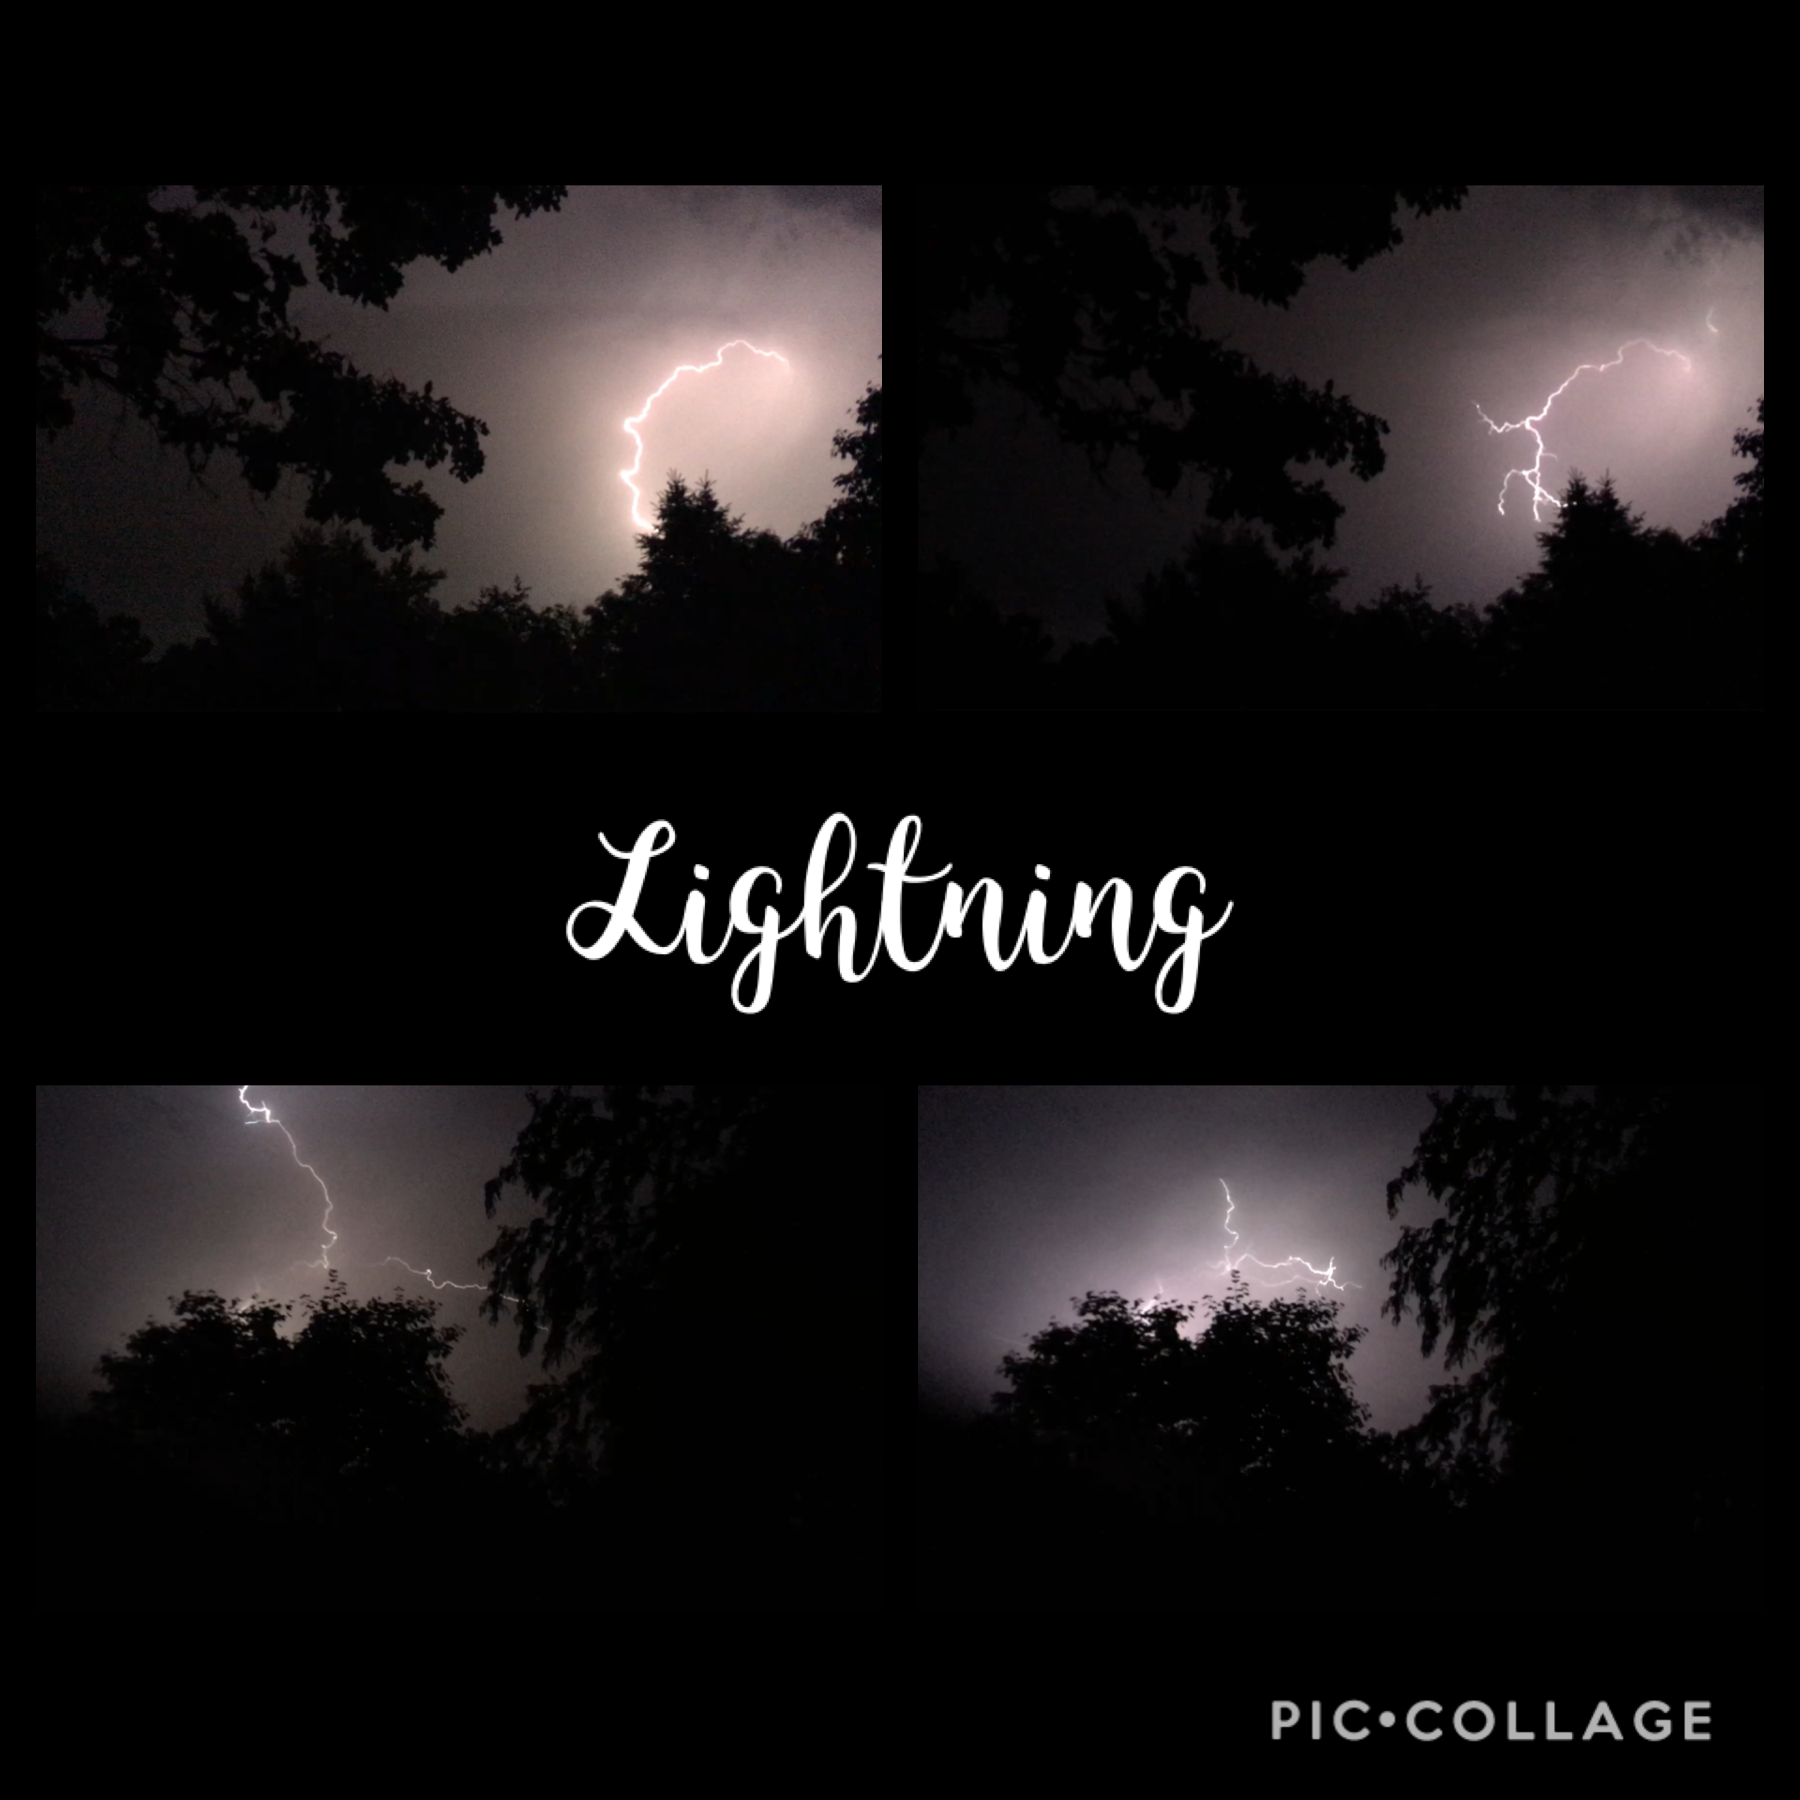 Took some pictures of the lightning at my house 😊